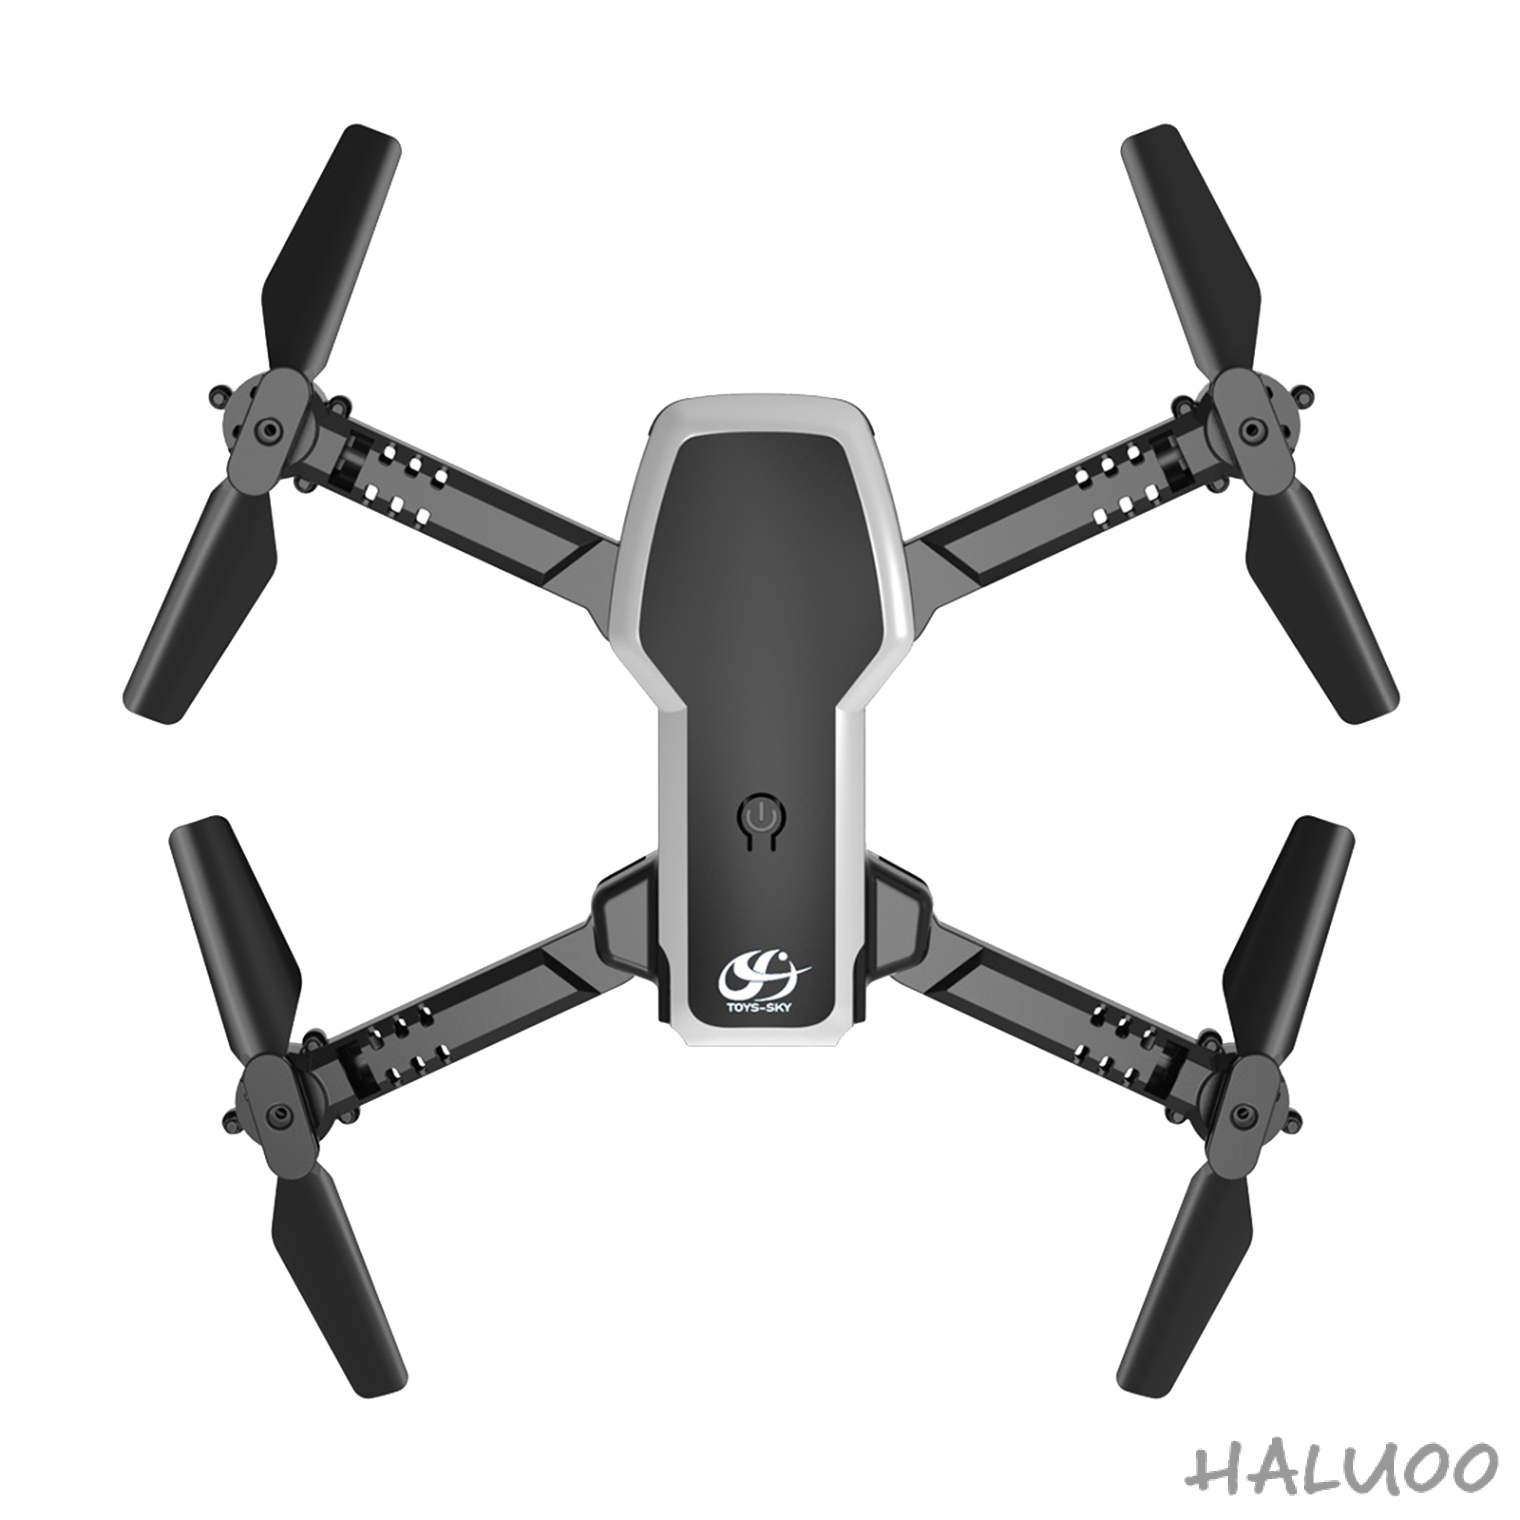 Foldable 2.4G WiFi Mini Drone w/ LED Light RC Drone Quadcopter with Camera for Adult Toys Outdoor